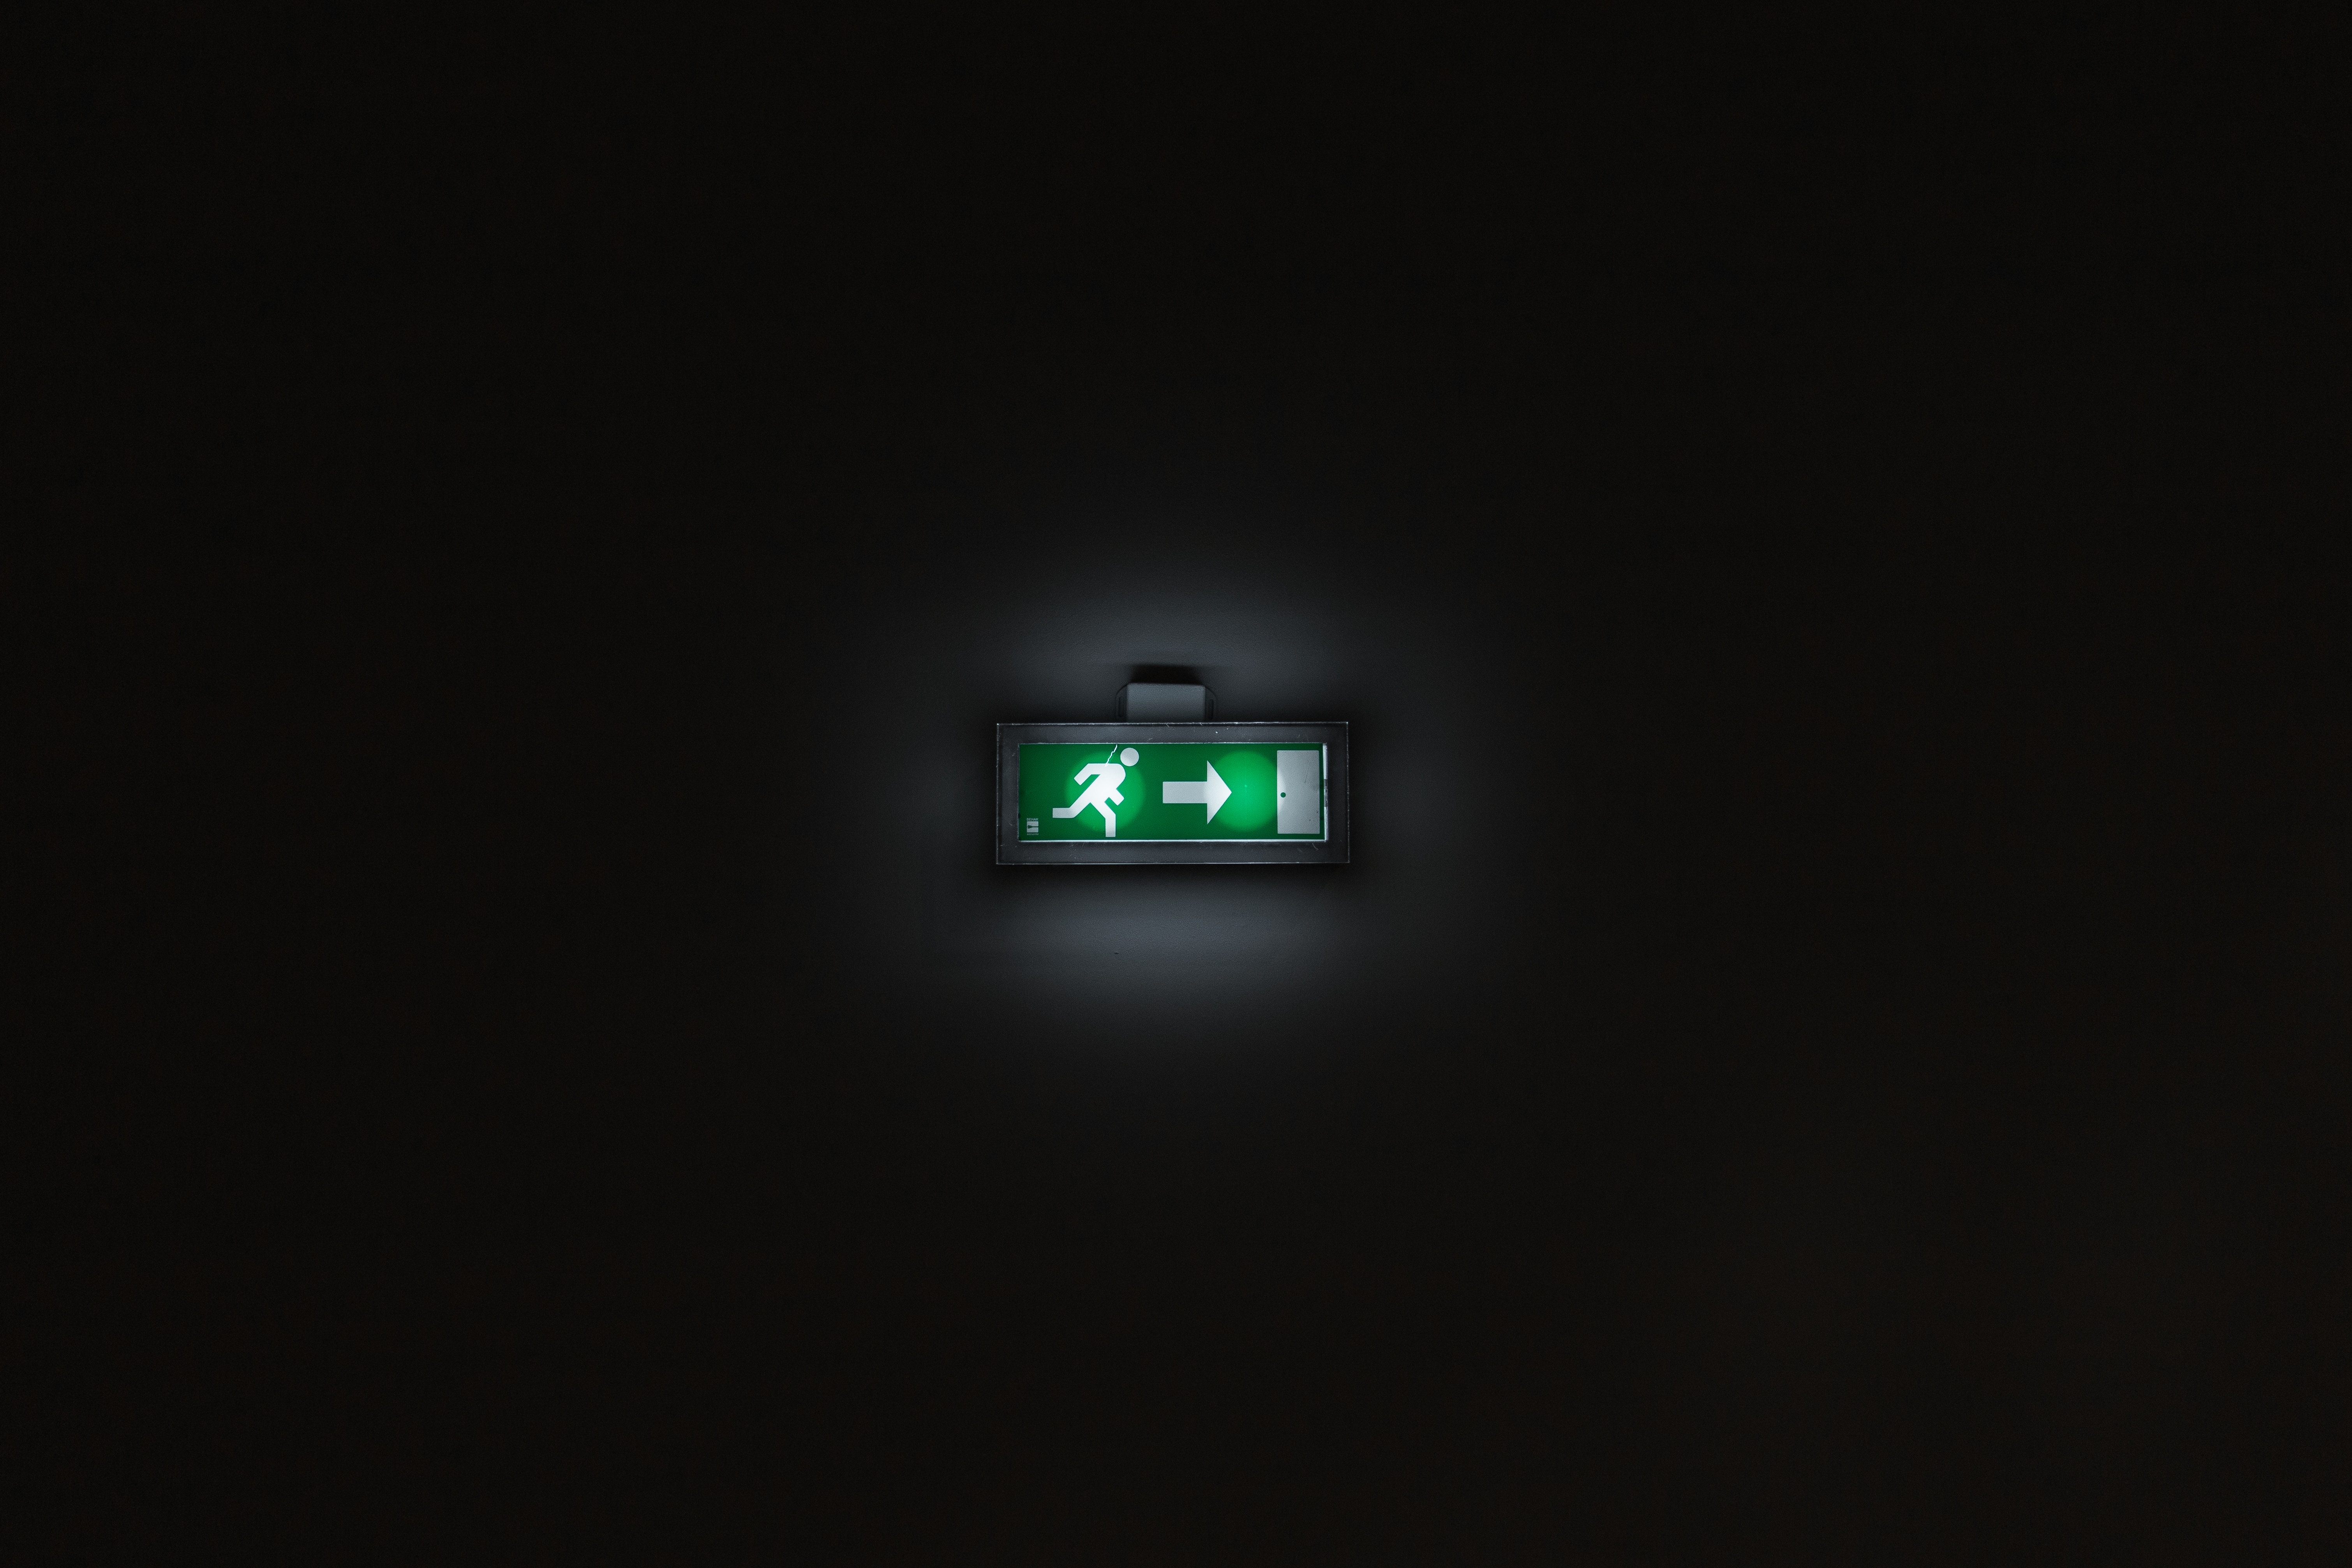 exit, dark, illumination, backlight, pointer, sign, output cell phone wallpapers